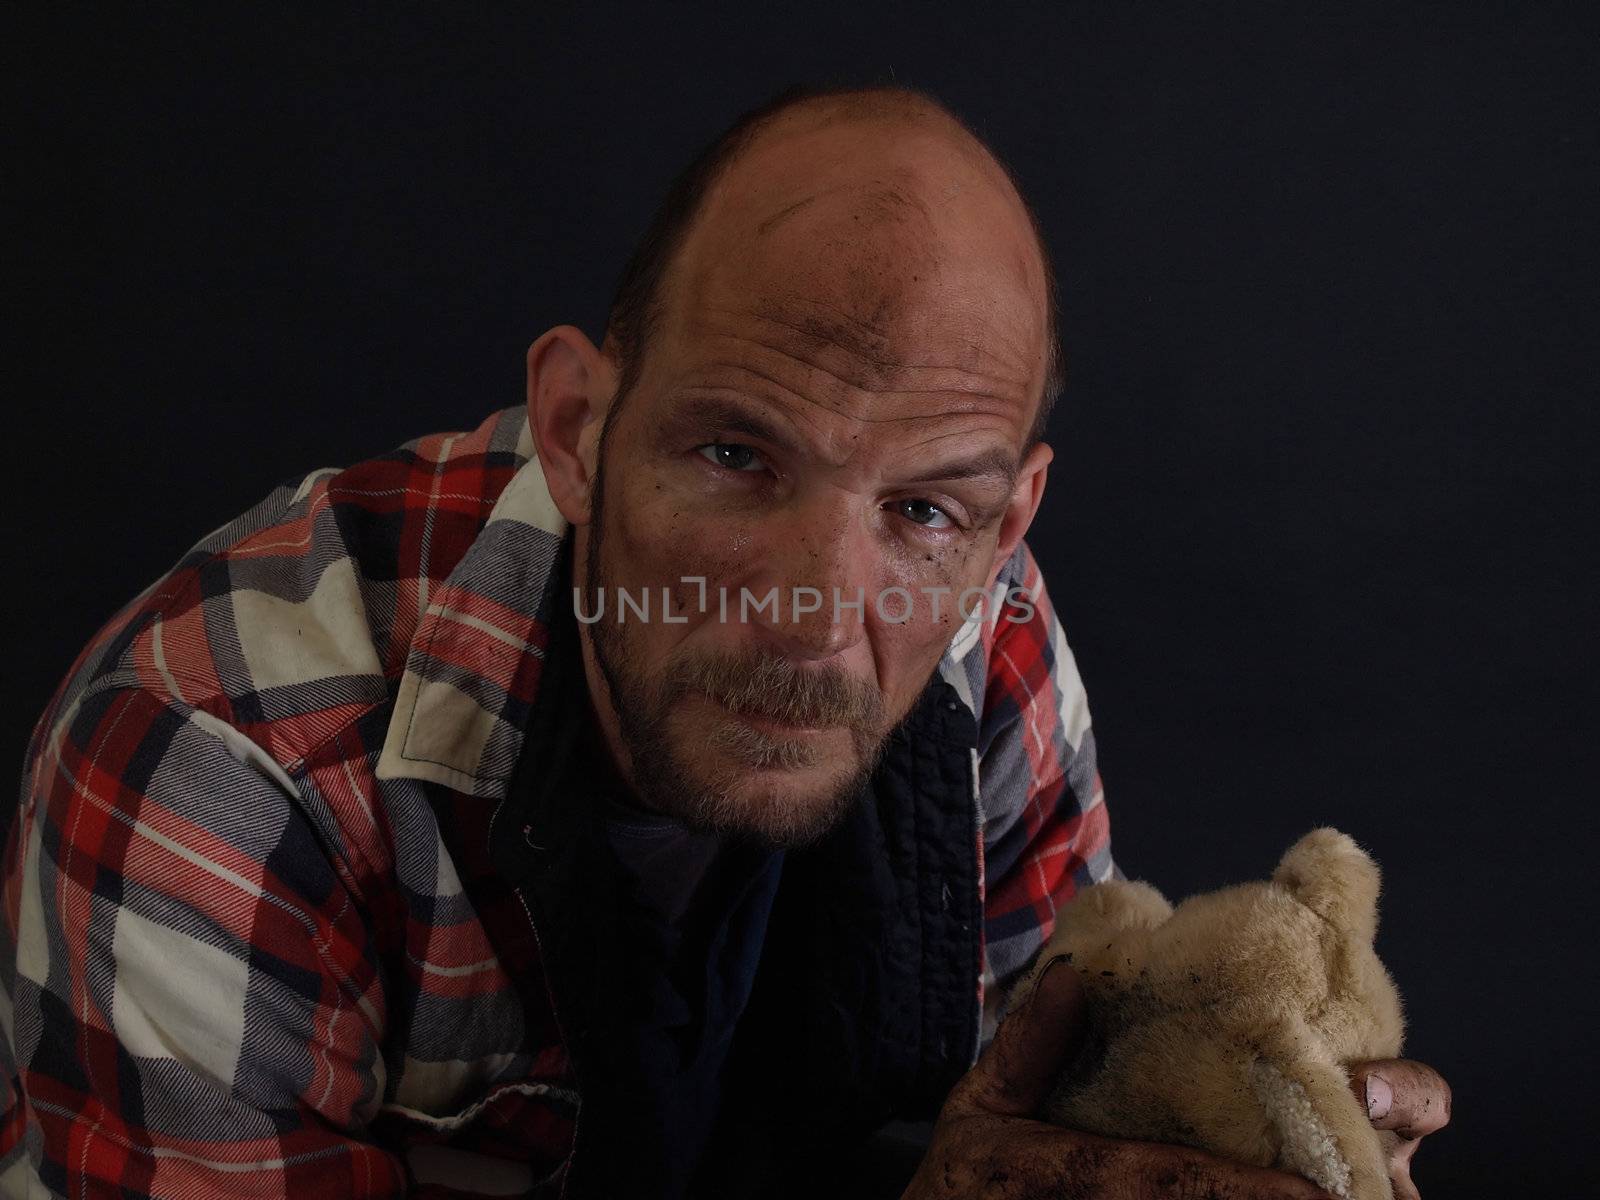 A dirt covered man holds an orphaned dirty stuffed teddy bear in one hand, a look of sadness on his face. Over a black background.